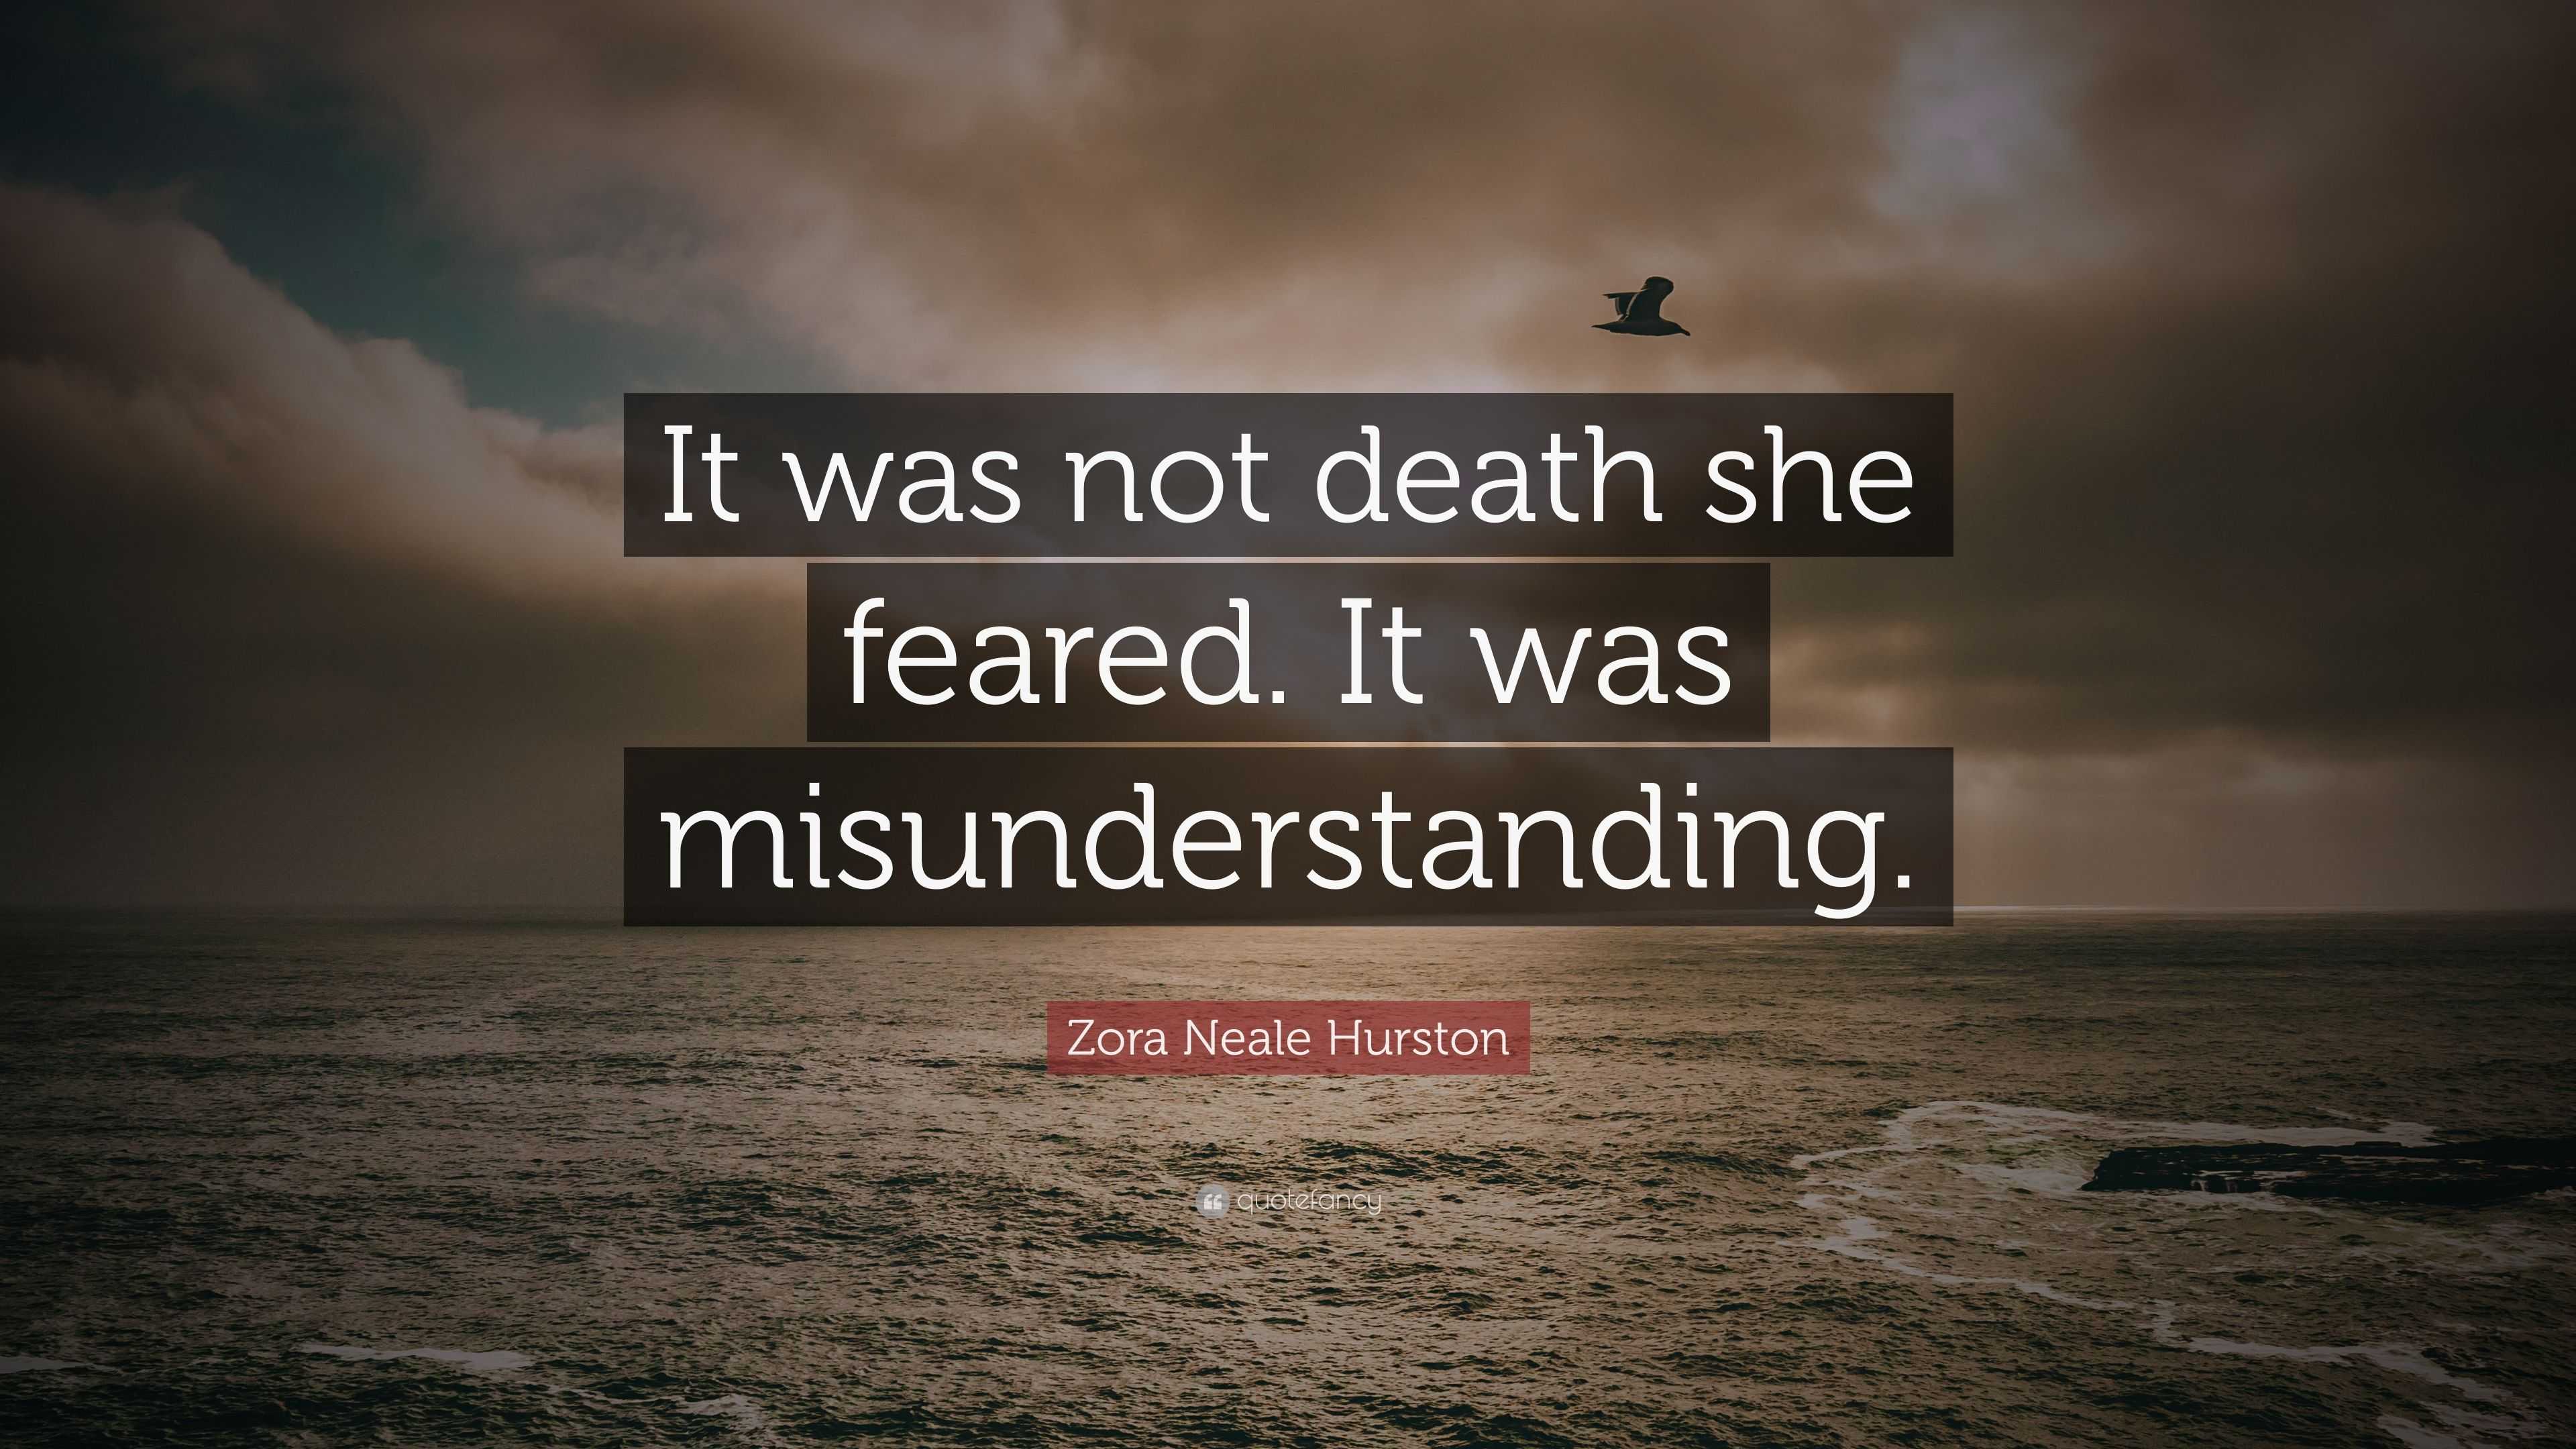 Zora Neale Hurston Quote: “It was not death she feared. It was ...